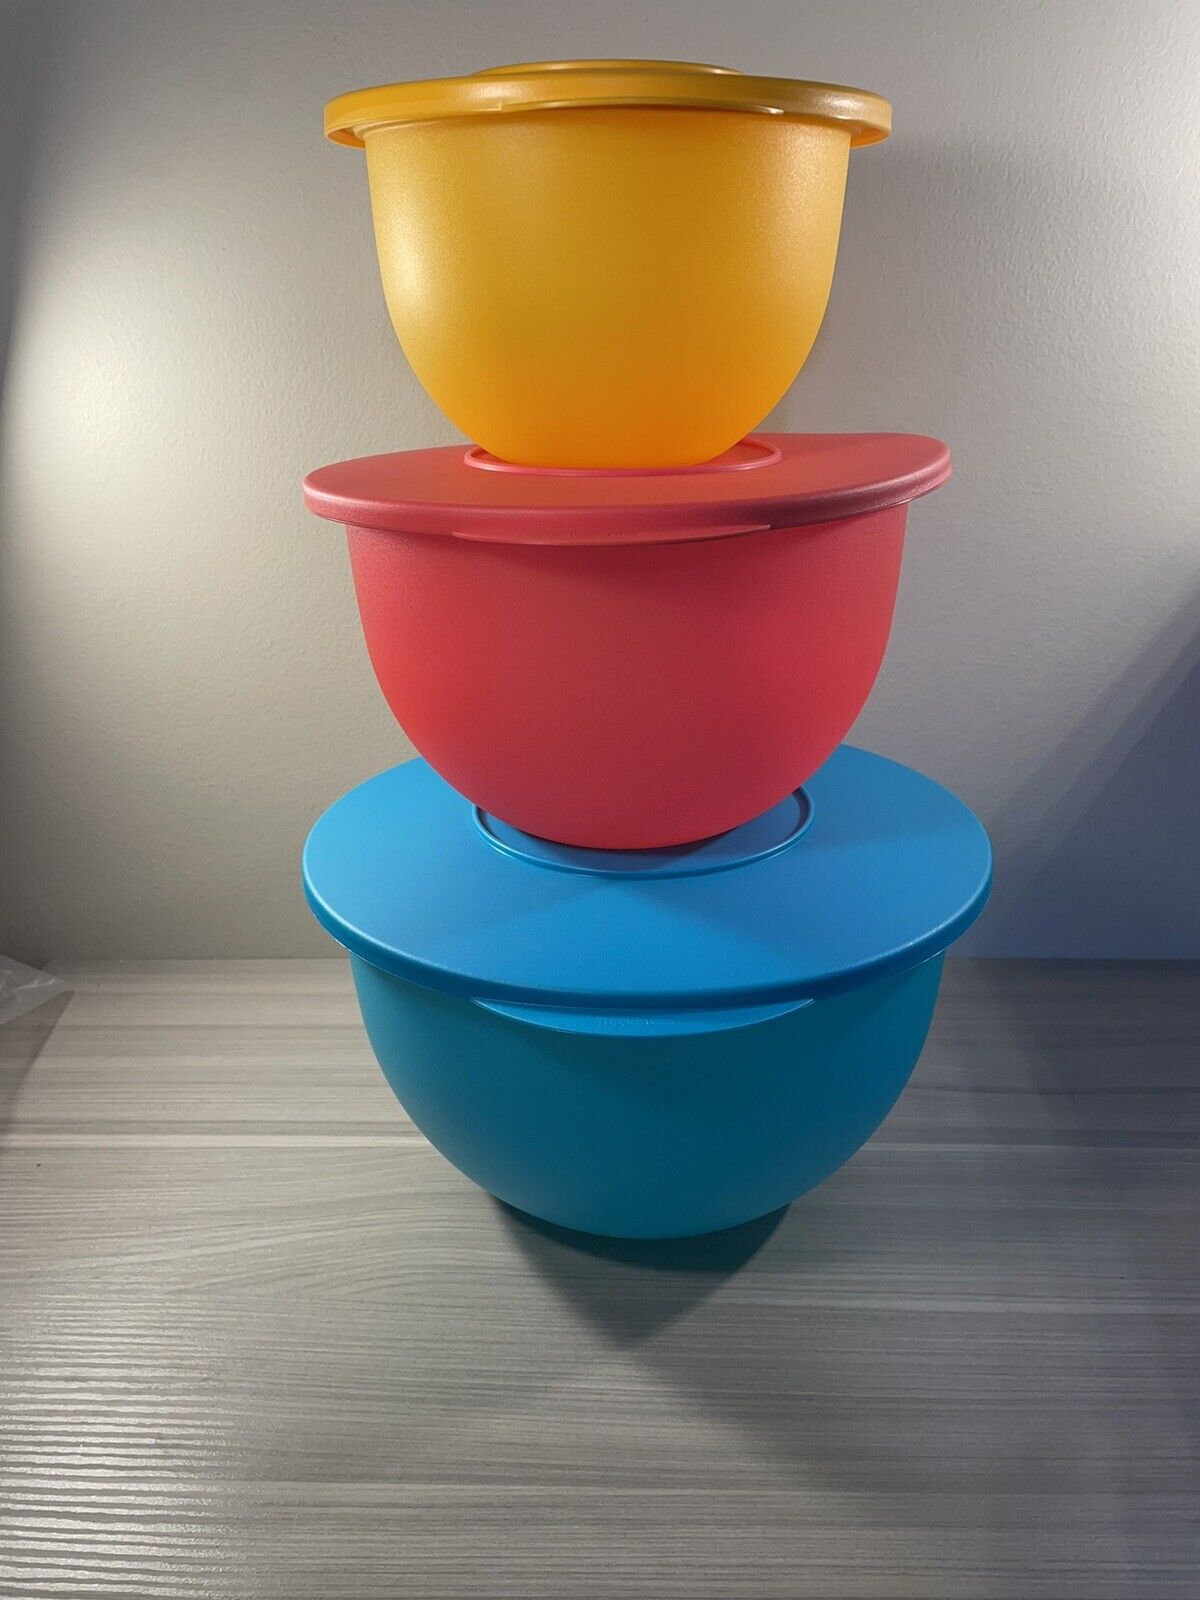 New Tupperware Impressions Classic 3pc Bowl Set Limited Edition Colors